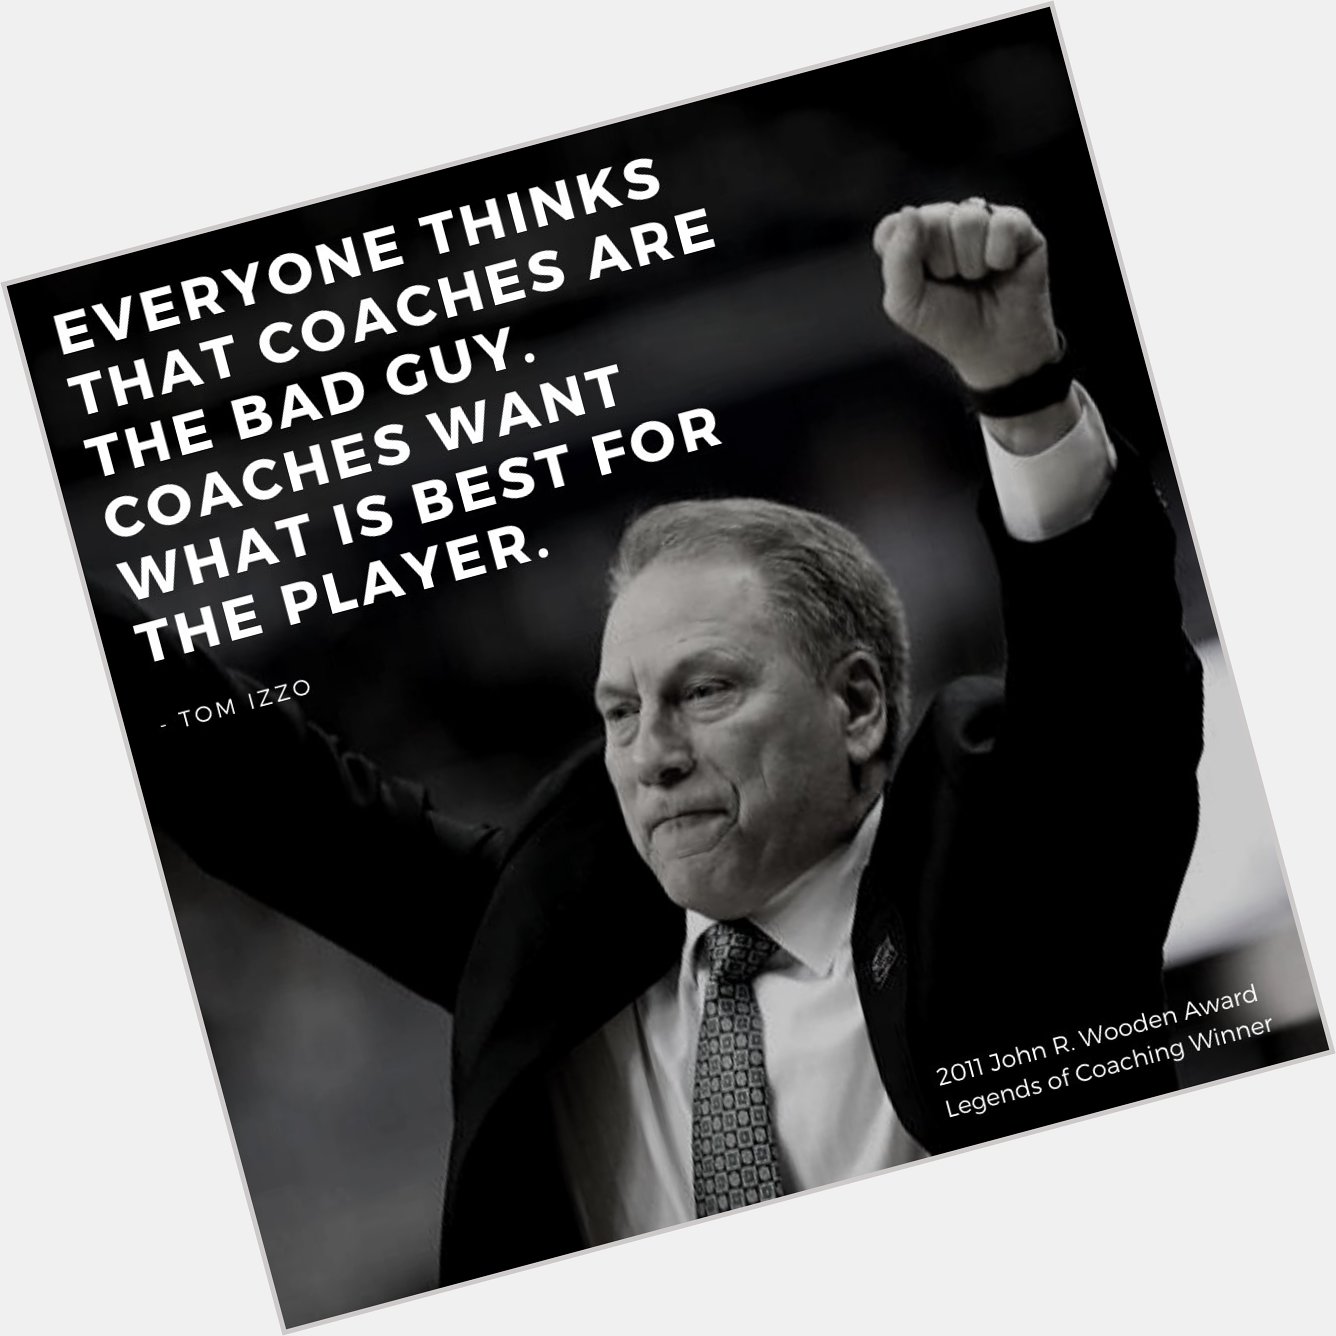 Wishing a Happy Birthday to 2011 Legends of Coaching recipient Tom Izzo of 